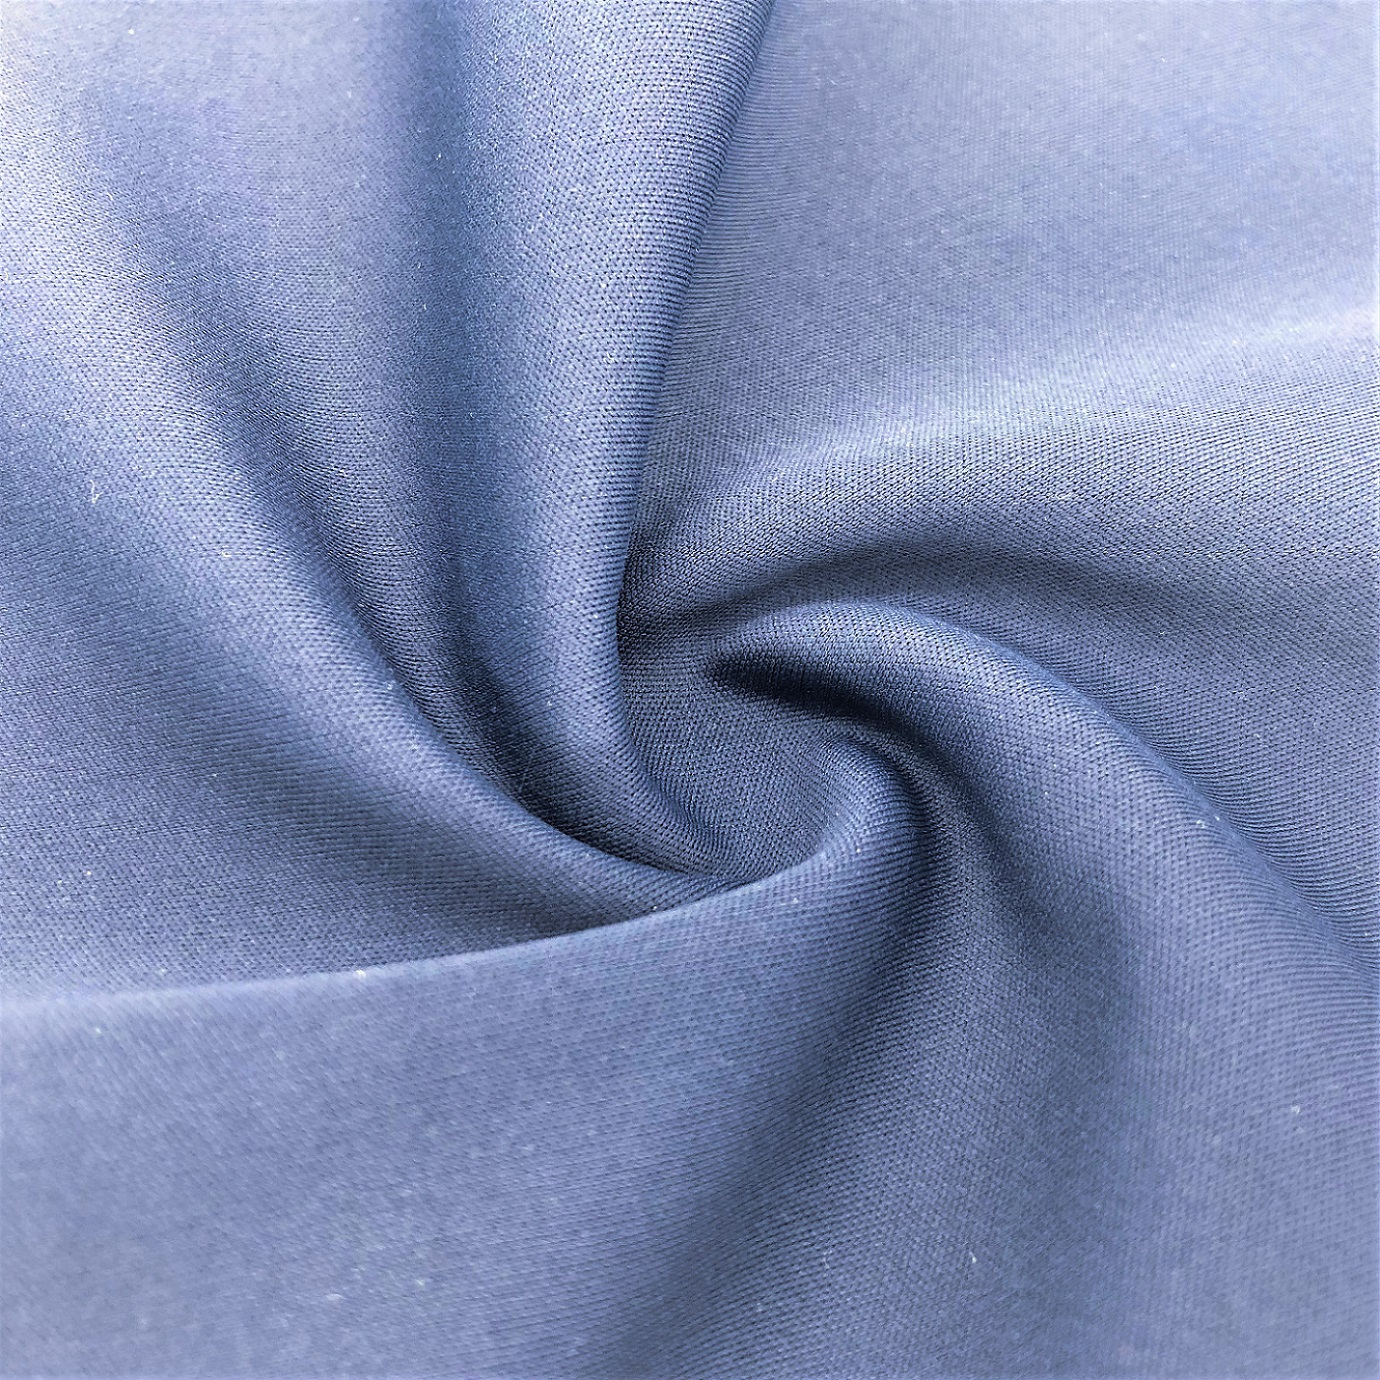 What are fashion outdoor fabric